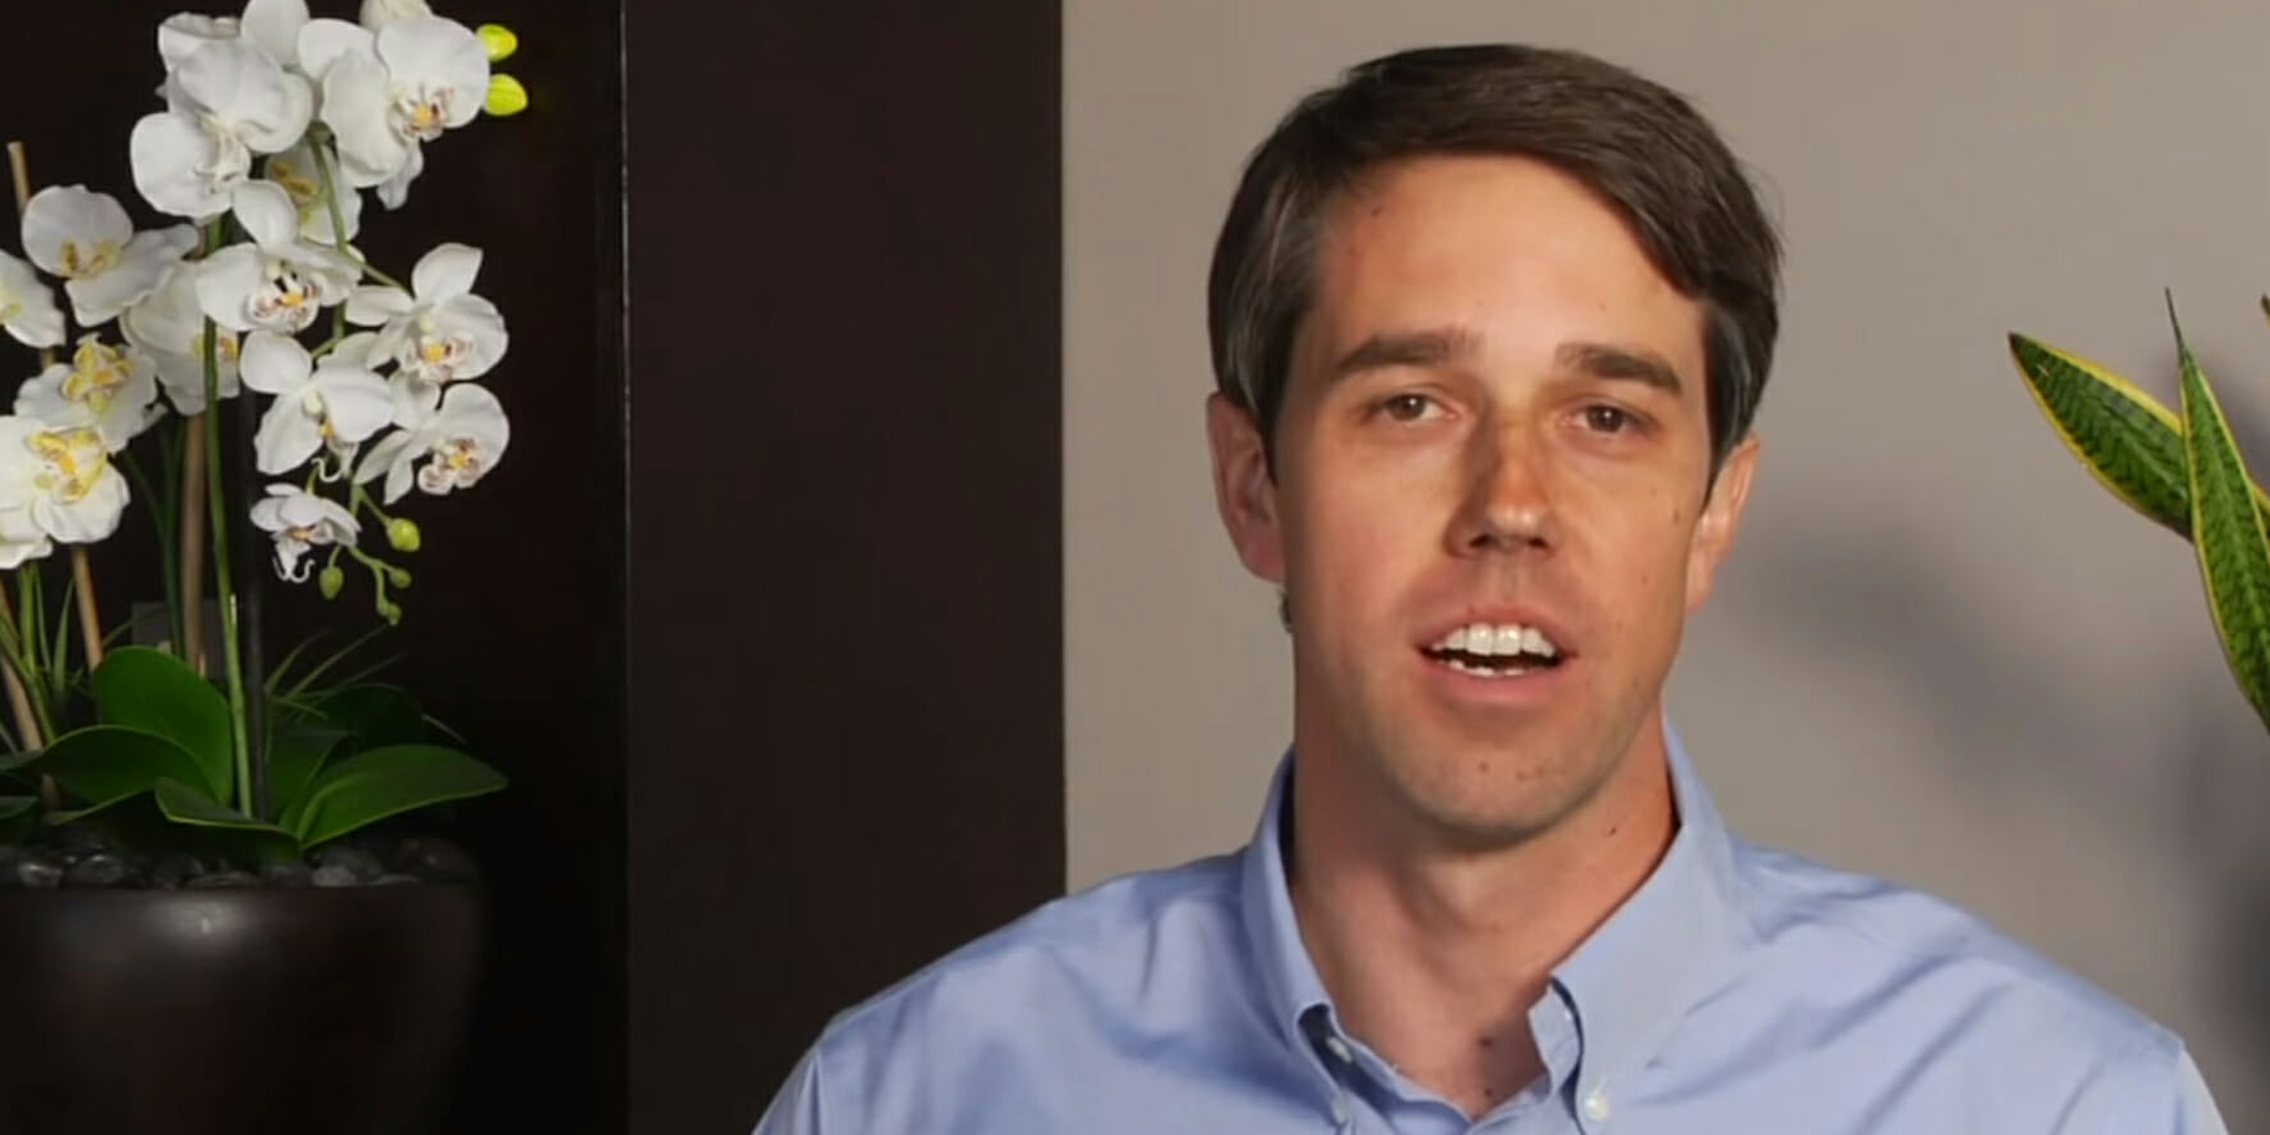 Beto O'Rourke apologizes for college Broadway review remarks about women